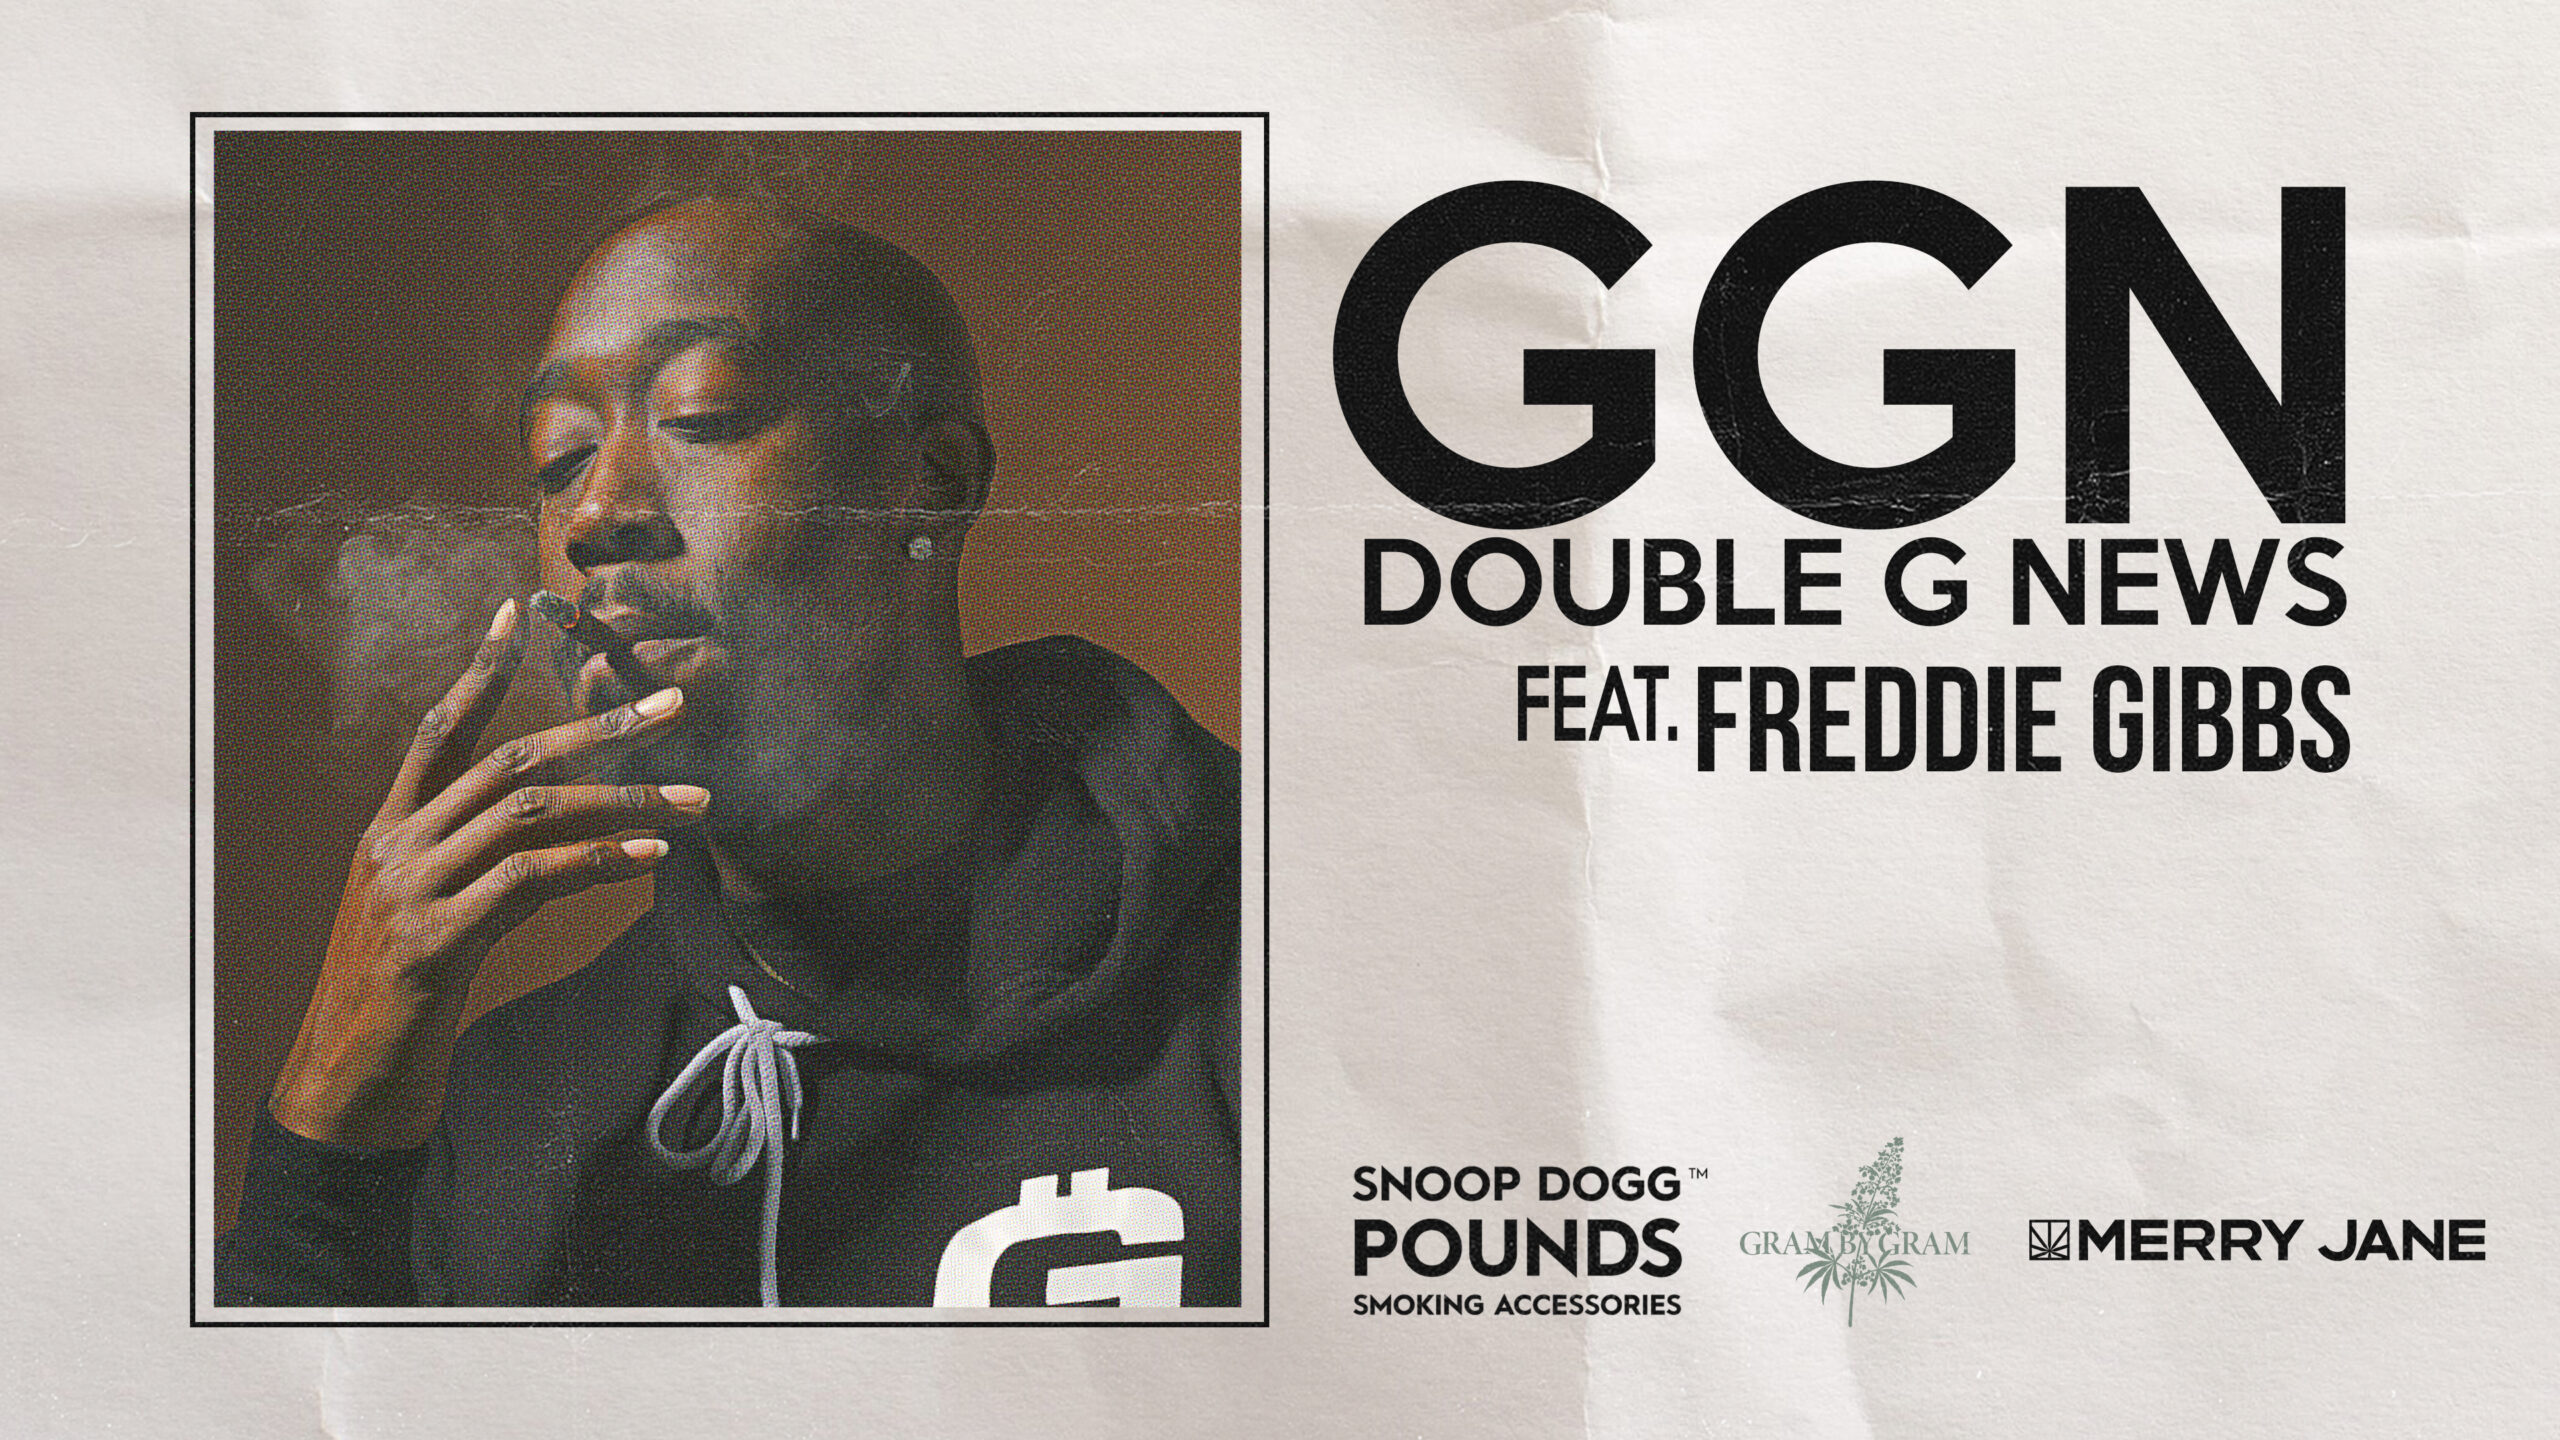 GGN FREDDIE GIBBS AND SNOOP DOGG… SOCIAL MEDIA COMEDIANS AND BLAXPLOITATION REVIVAL! (Preview)